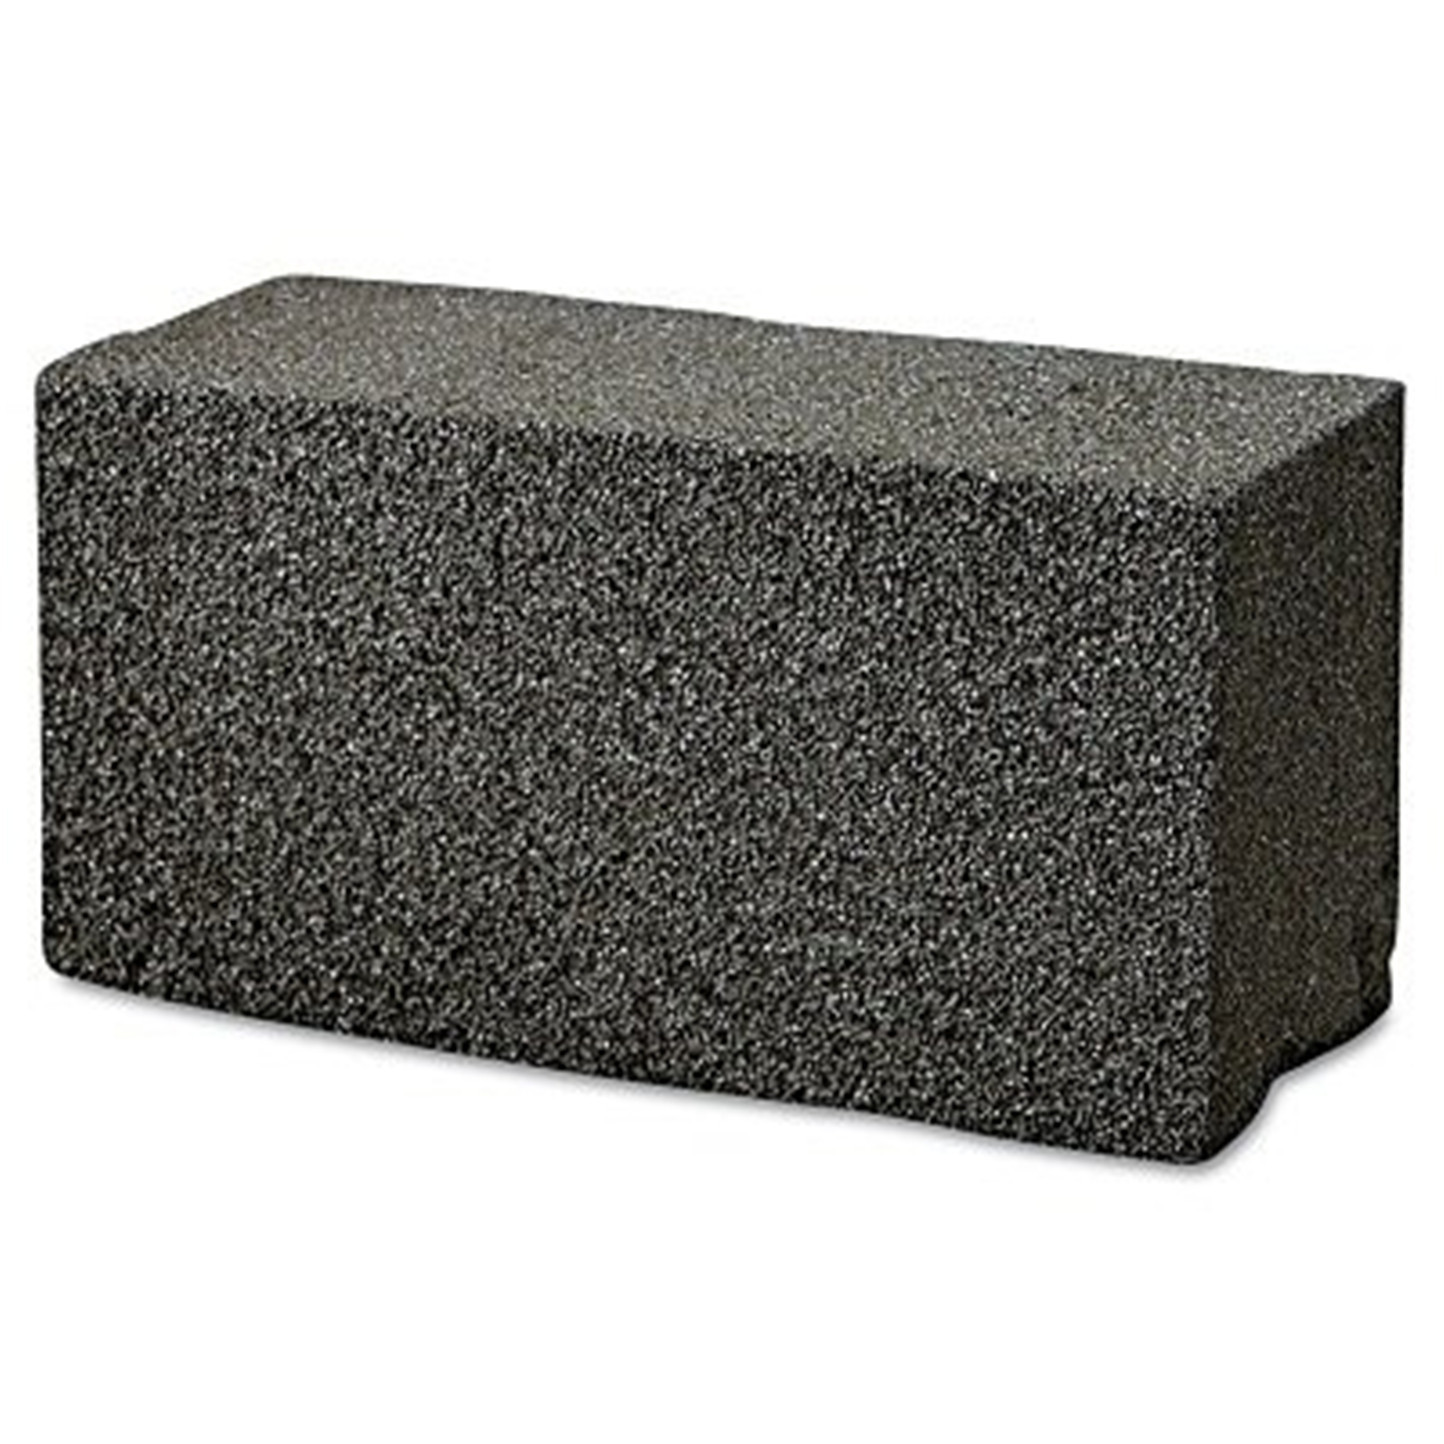 China supplier of GRILL BRICK, 3-1/2W X 4H X 8L INCHES